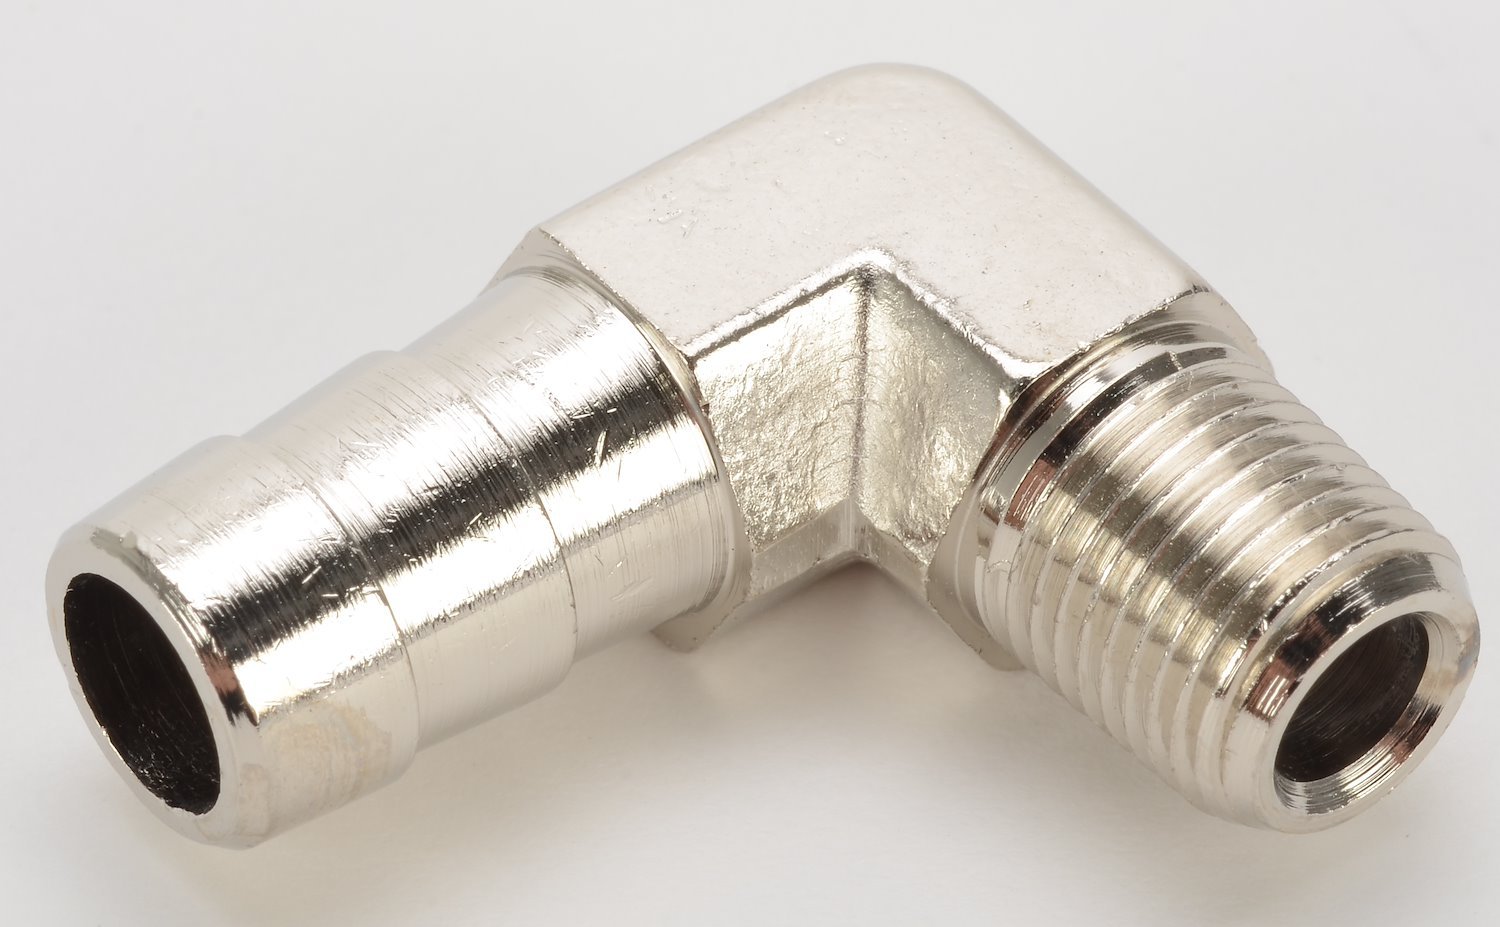 NPT 90-Degree Hose Barb Fitting [1/8 in. NPT to 3/8 in. Hose, Nickel-Plated Brass]